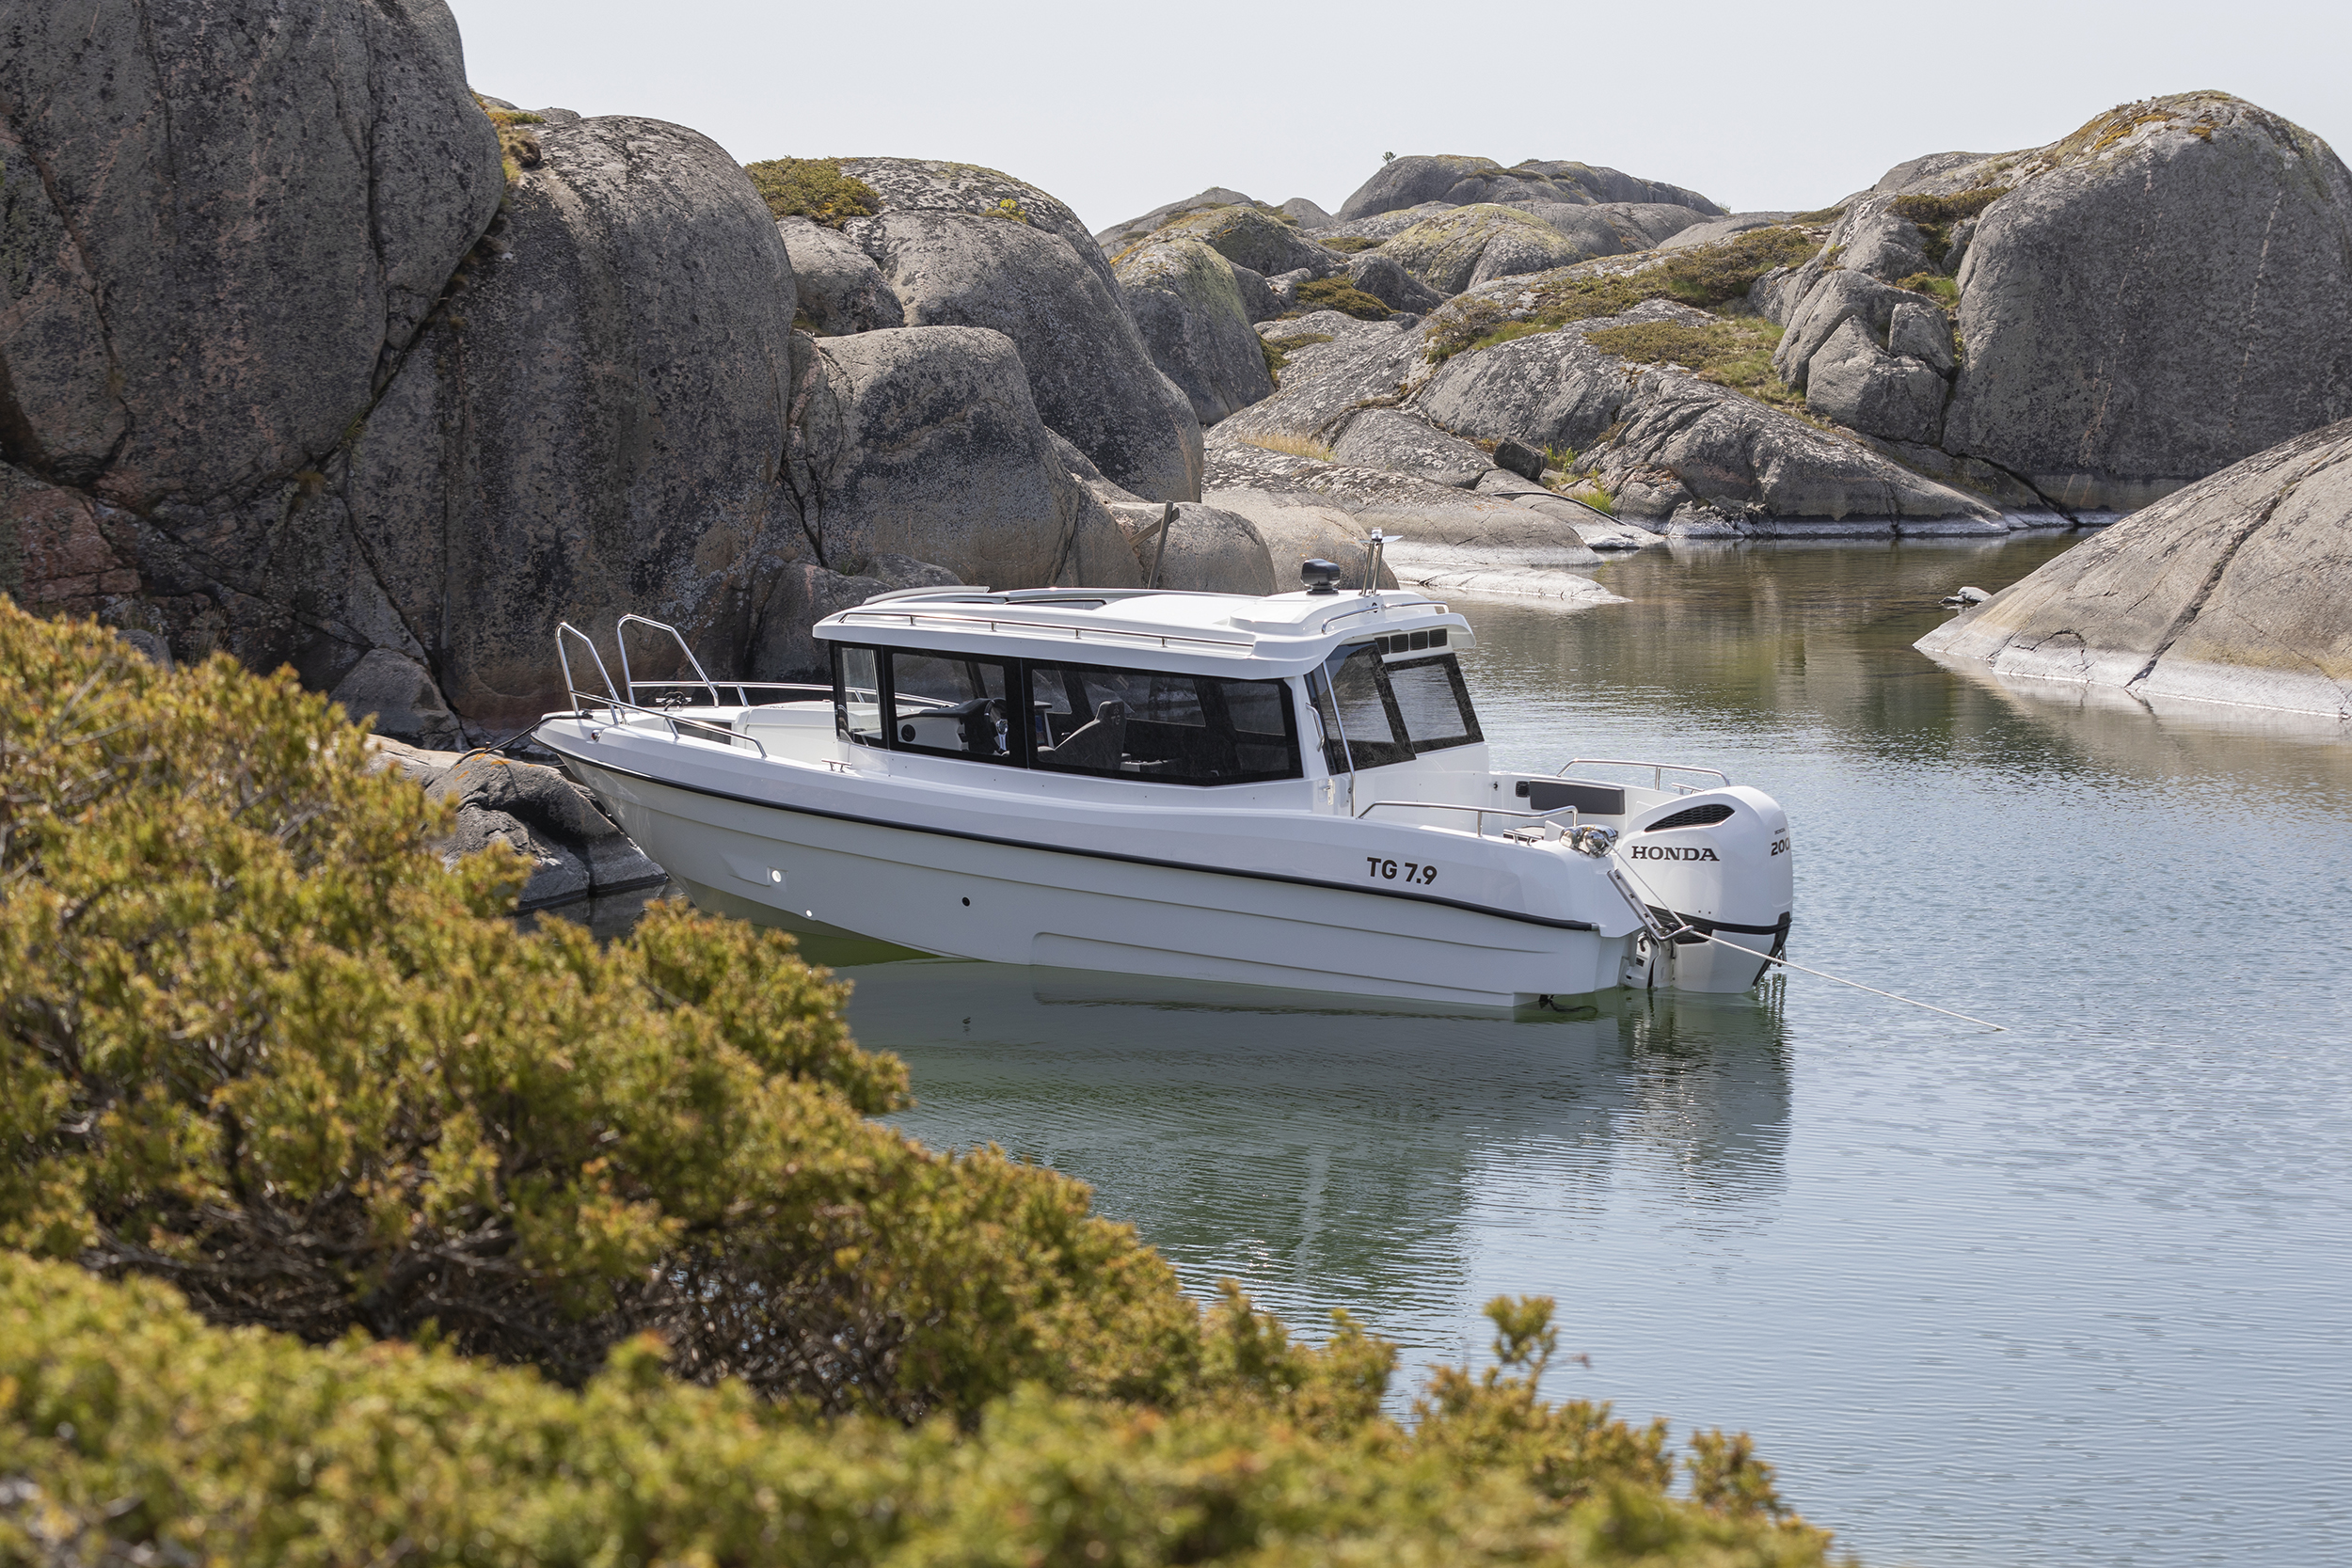 TG 7.9 cabin boat anchored amongst cliffs in the outer Finnish archipelago.